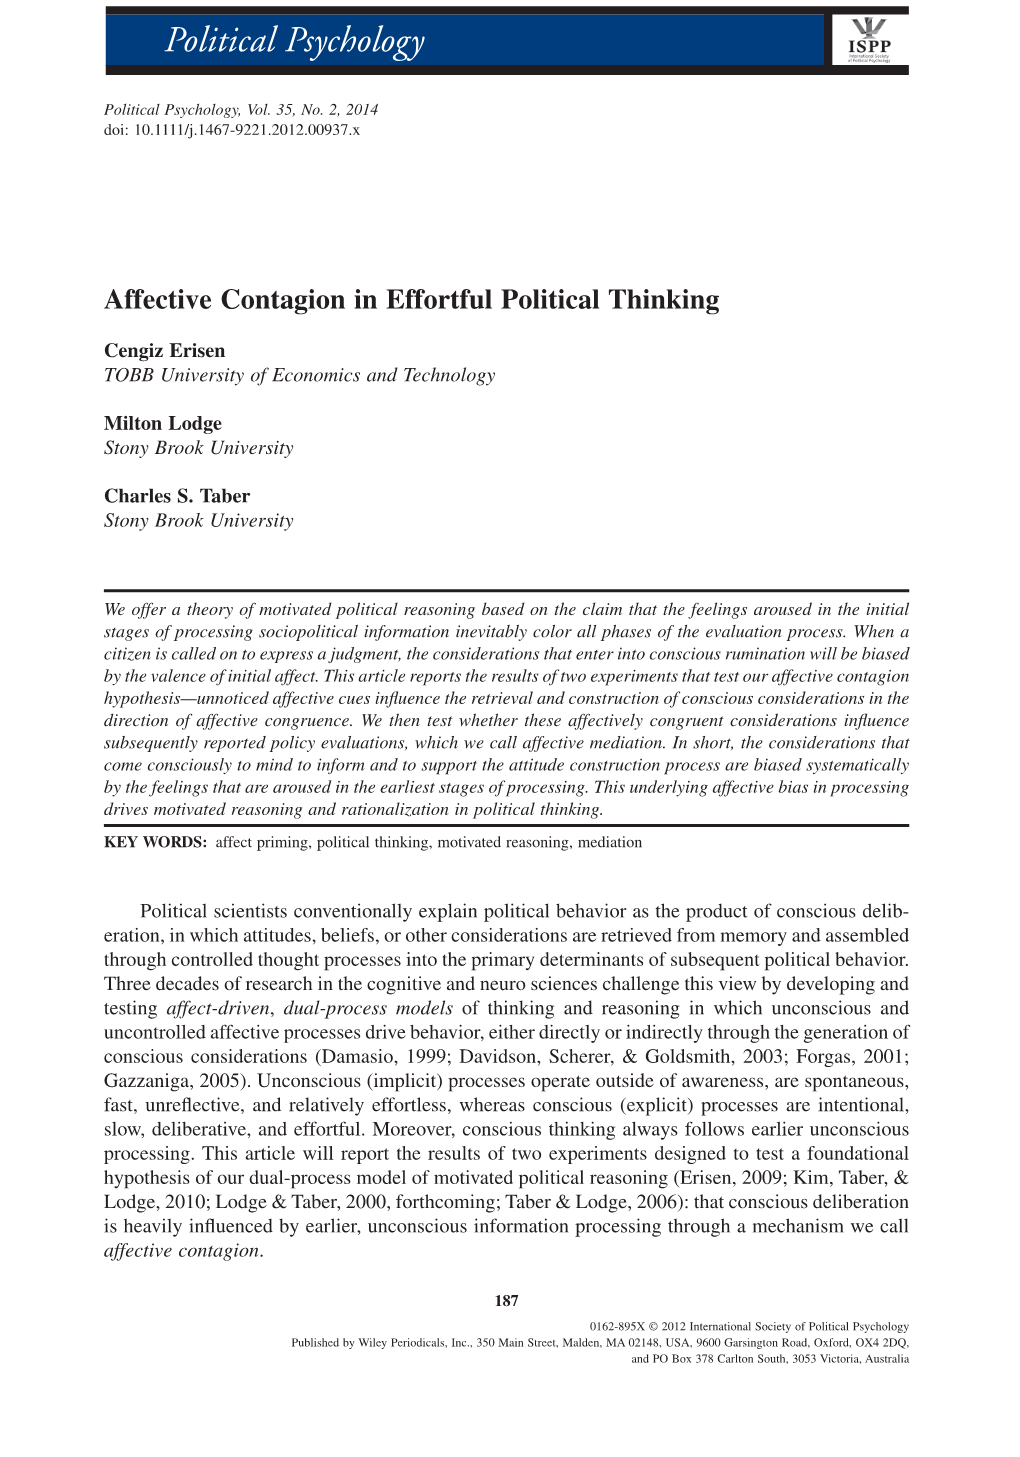 Affective Contagion in Effortful Political Thinking